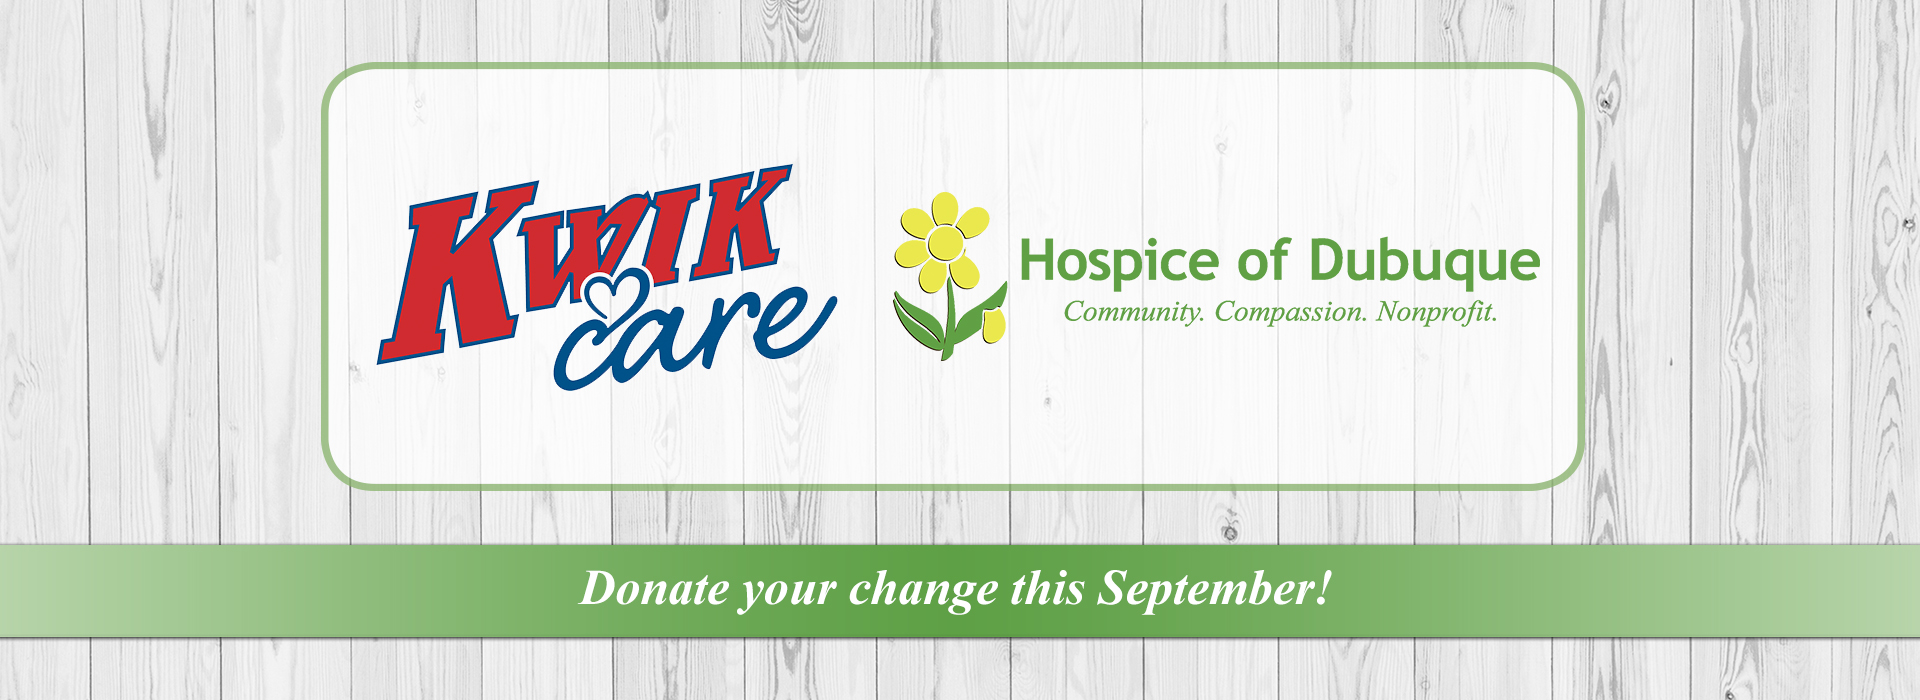 Kwik Stop Canisters for Hospice of Dubuque